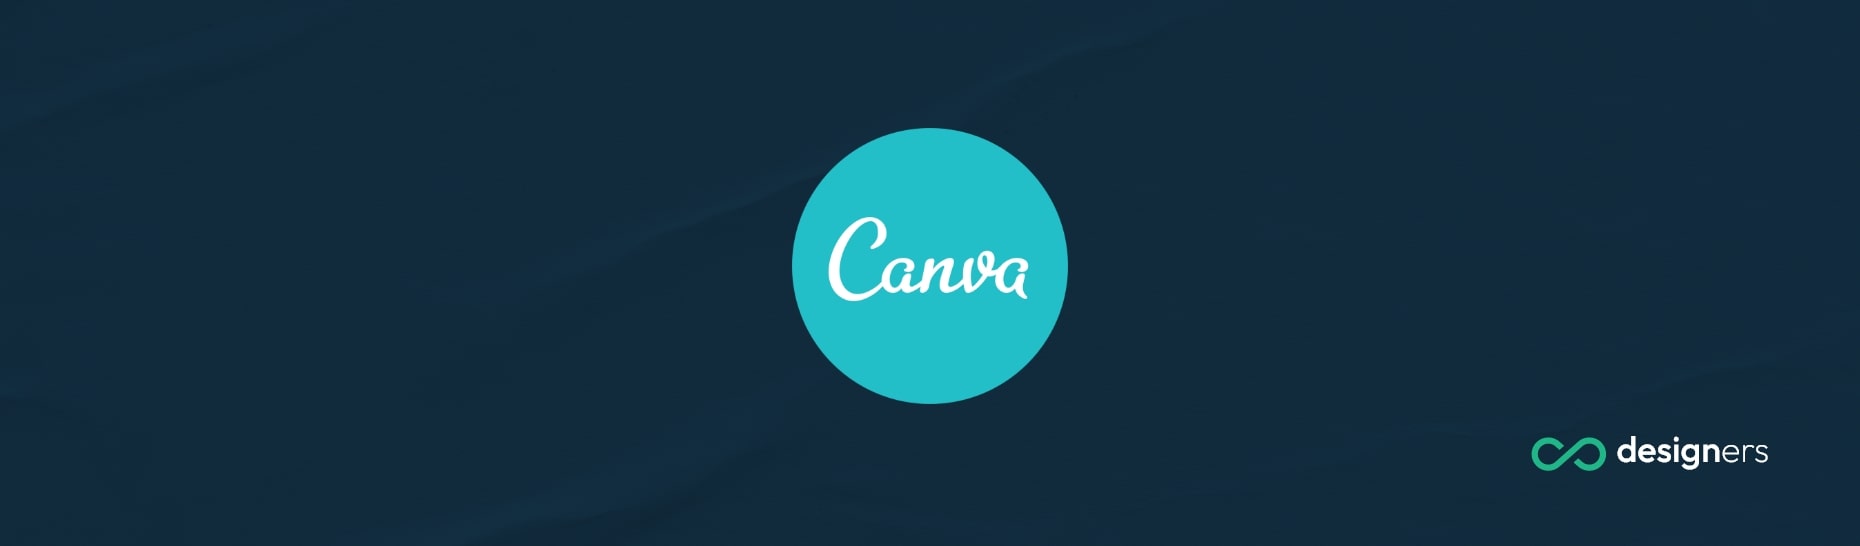 Does Canva Do Dropshipping?